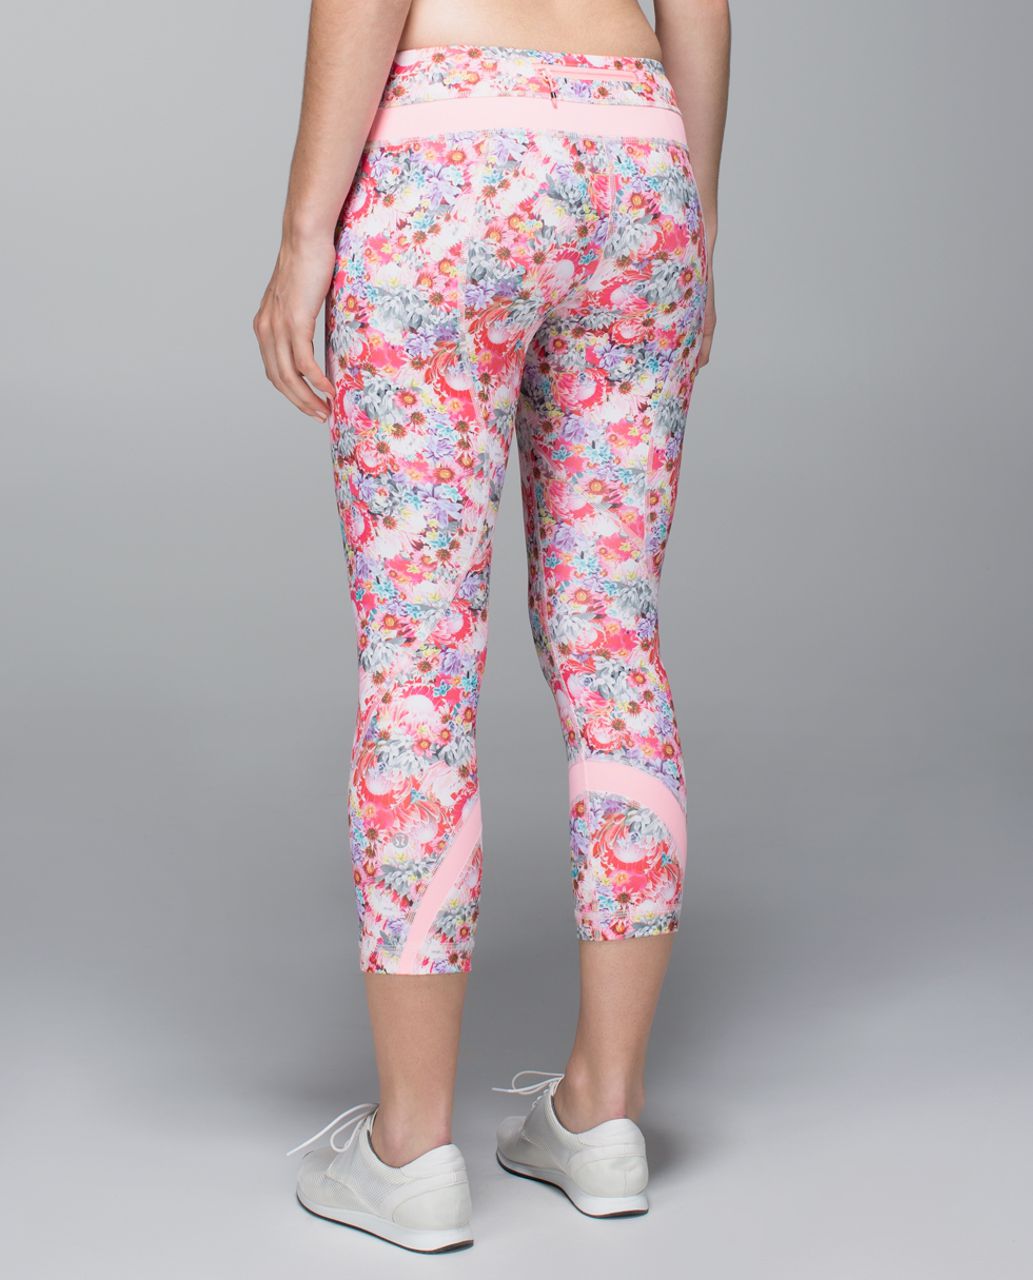 Lululemon Run Inspire Crop II blue and white floral leggings size 4